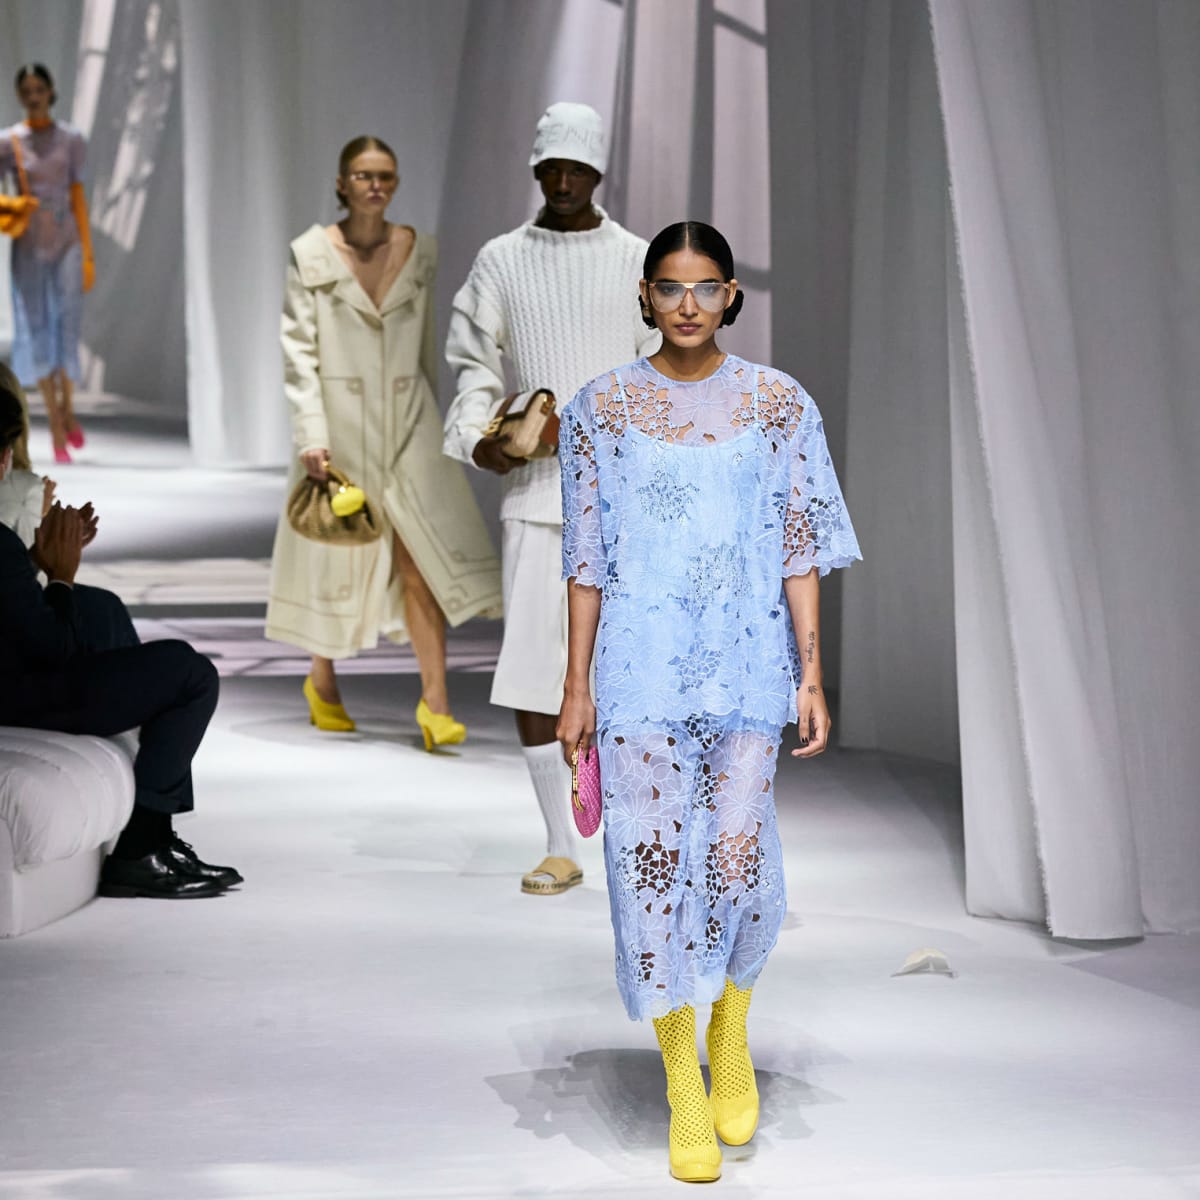 Fendi's Spring 2021 Show Was All About Family - Fashionista